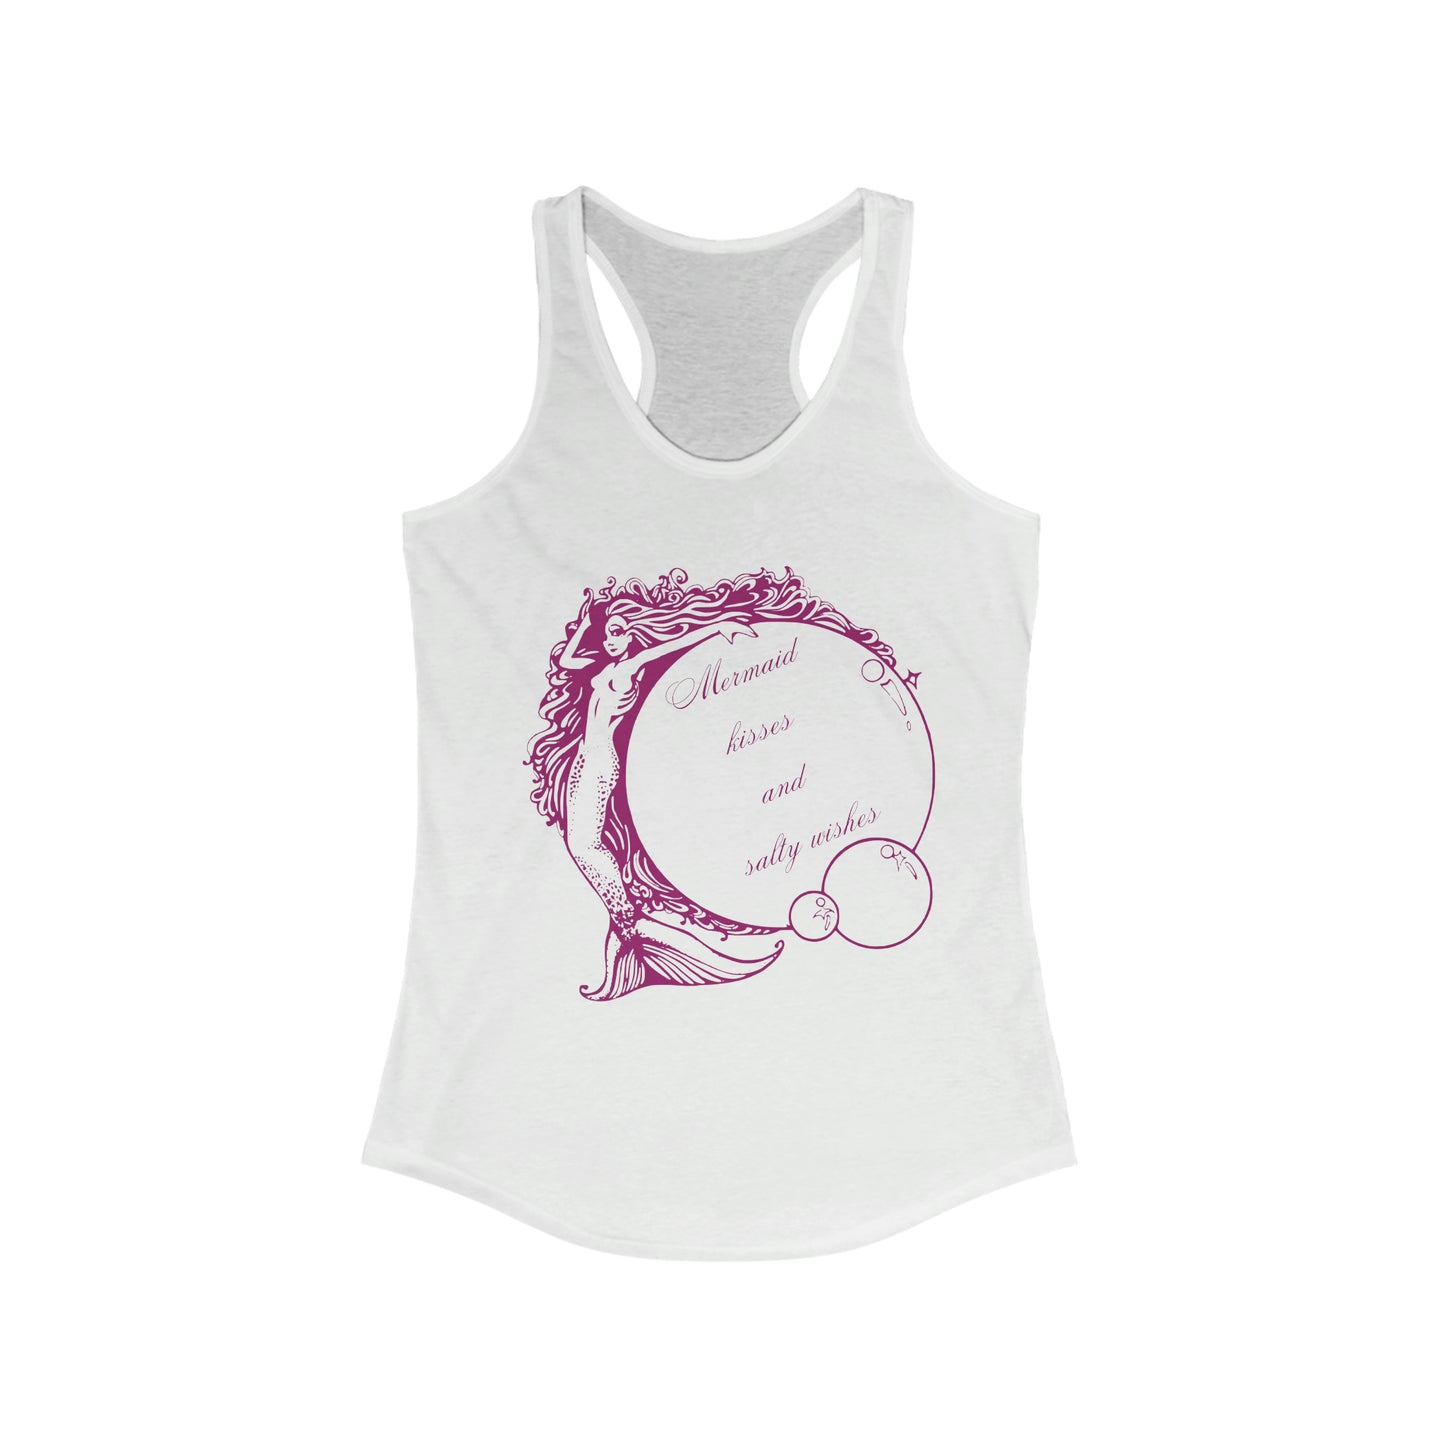 ‘Mermaid Kisses and Salty Wishes.’ Printed Front & Back.  Women's Ideal Racerback Tank